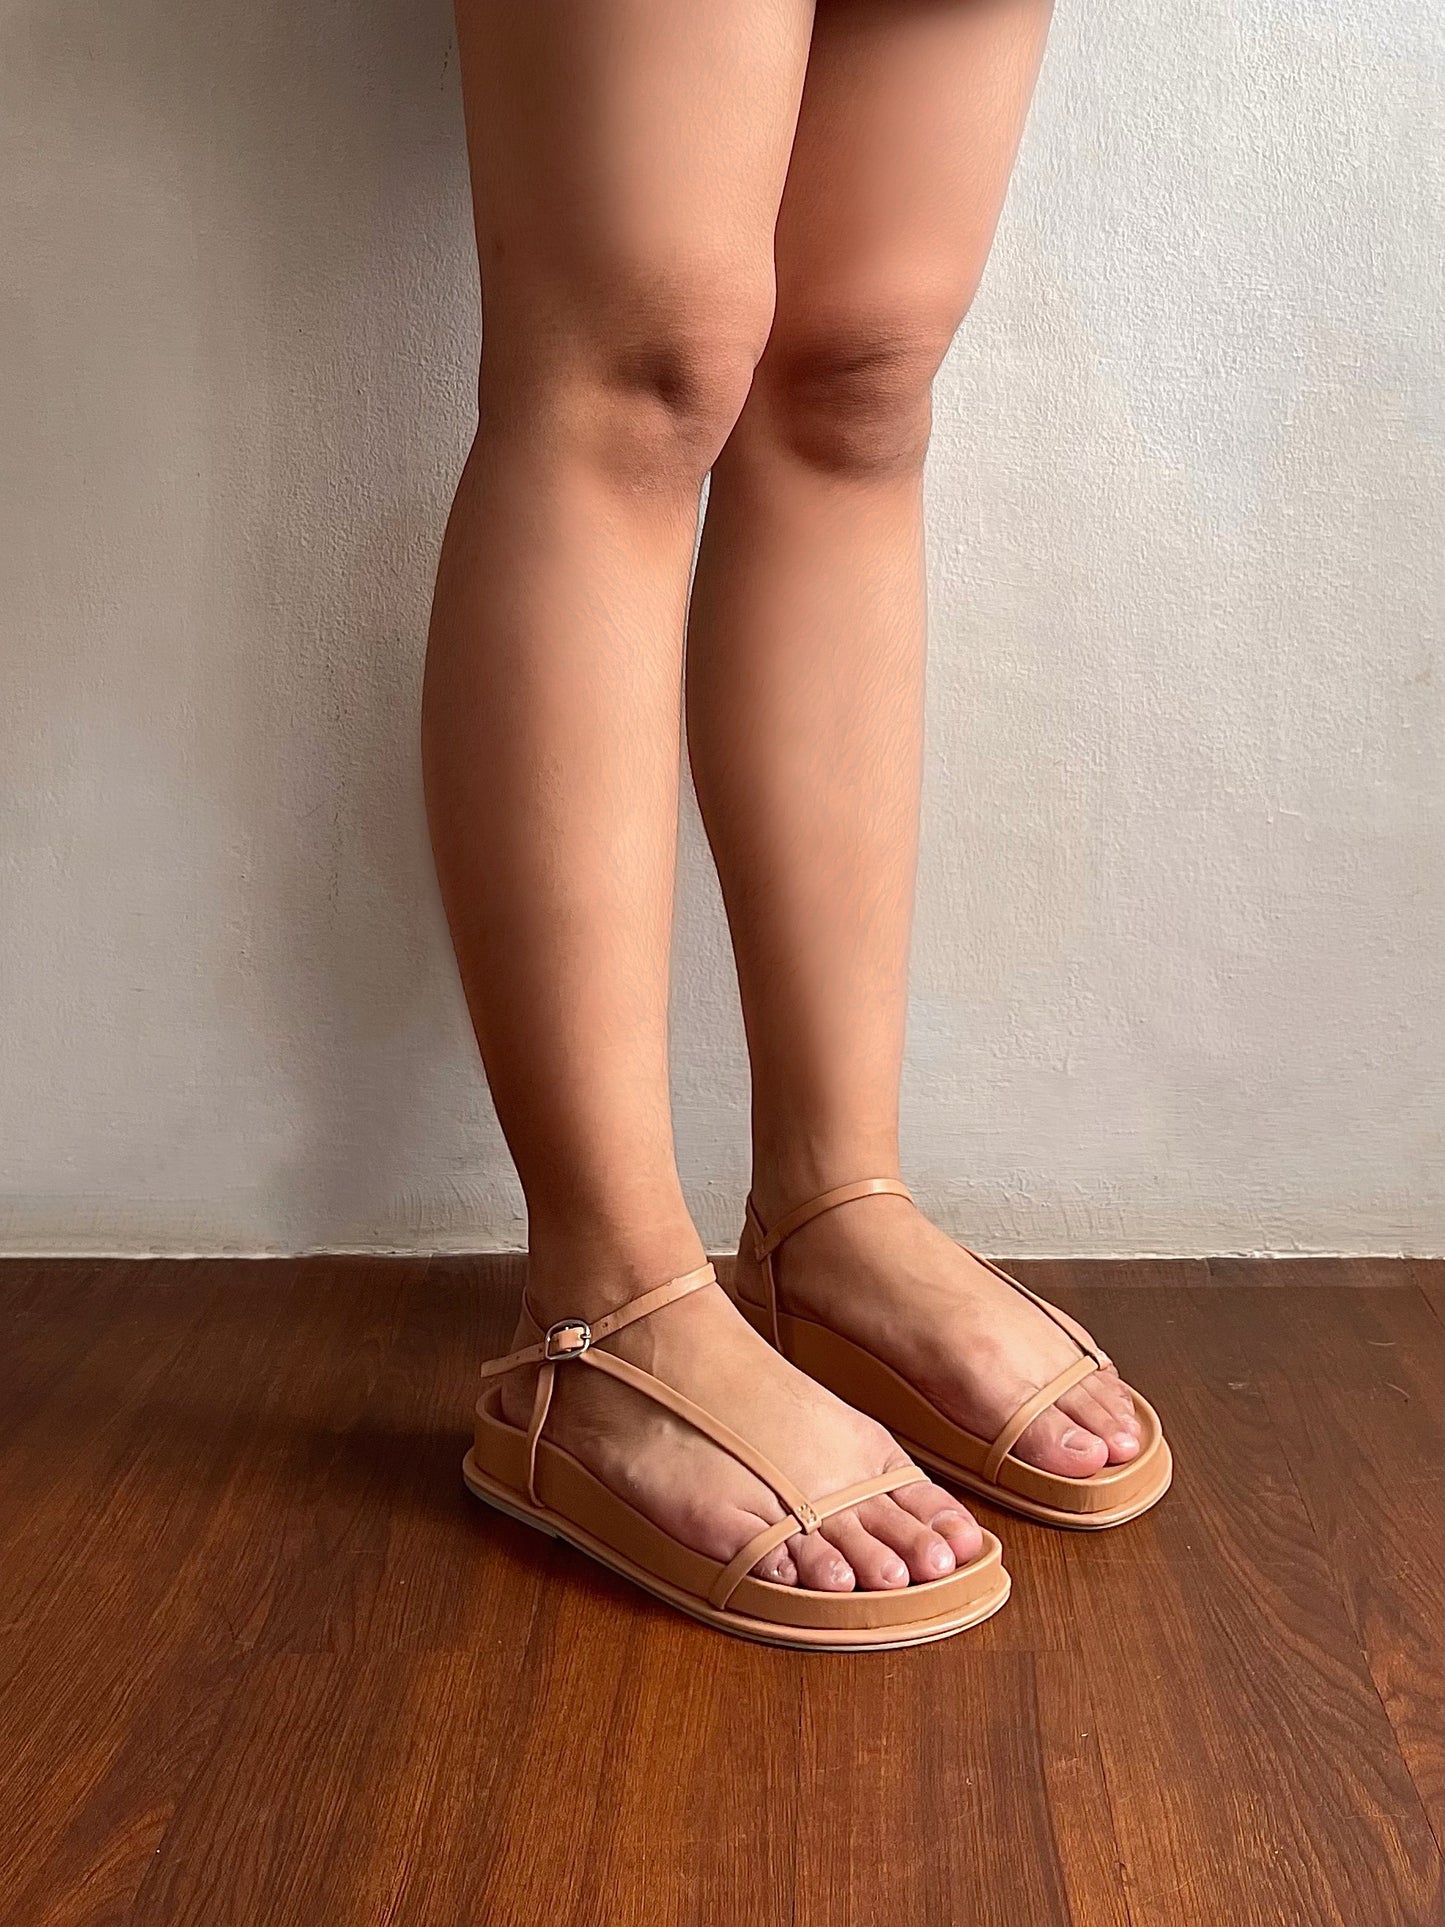 Sample 035: Everyday Slides in Nude - Size 7